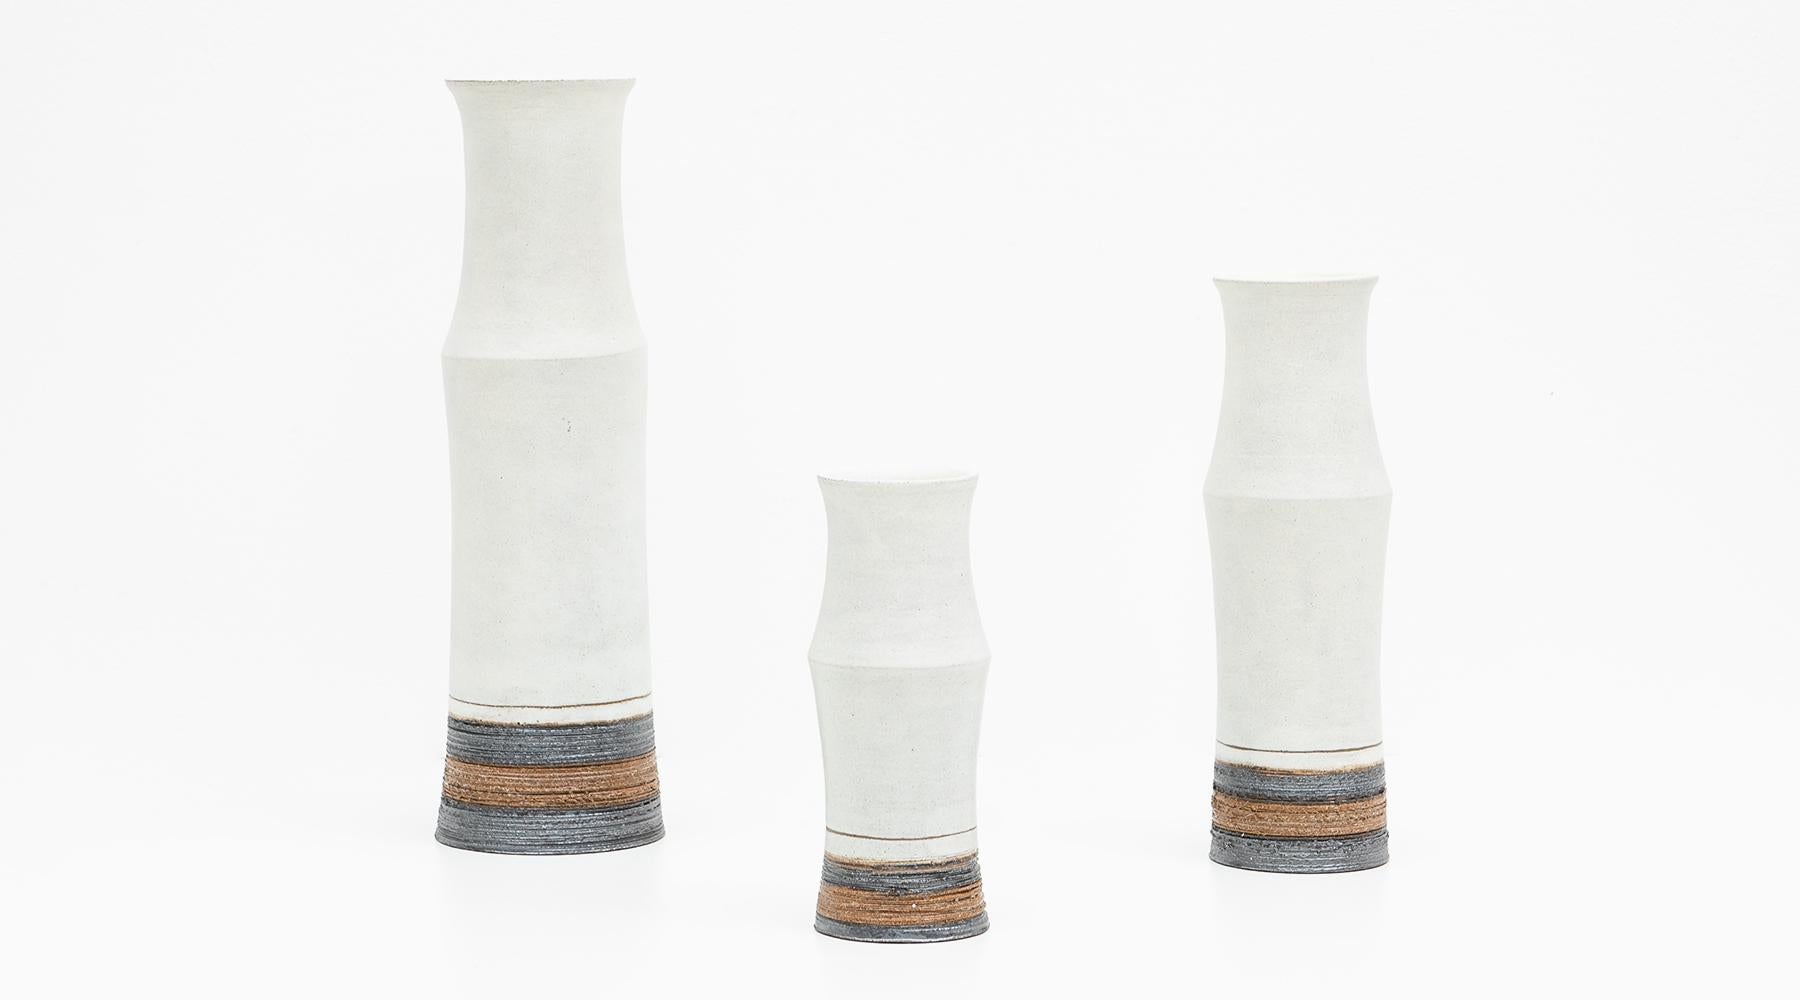 Bamboo bottles, set of three vases, ceramic, Bruno Gambone, Italy, 1980s.

Magnificent vases in a so-called bamboo optic by the multi-talented artist Bruno Gambone from 1980s, which vary in height and width. This set comes in sand colors, the